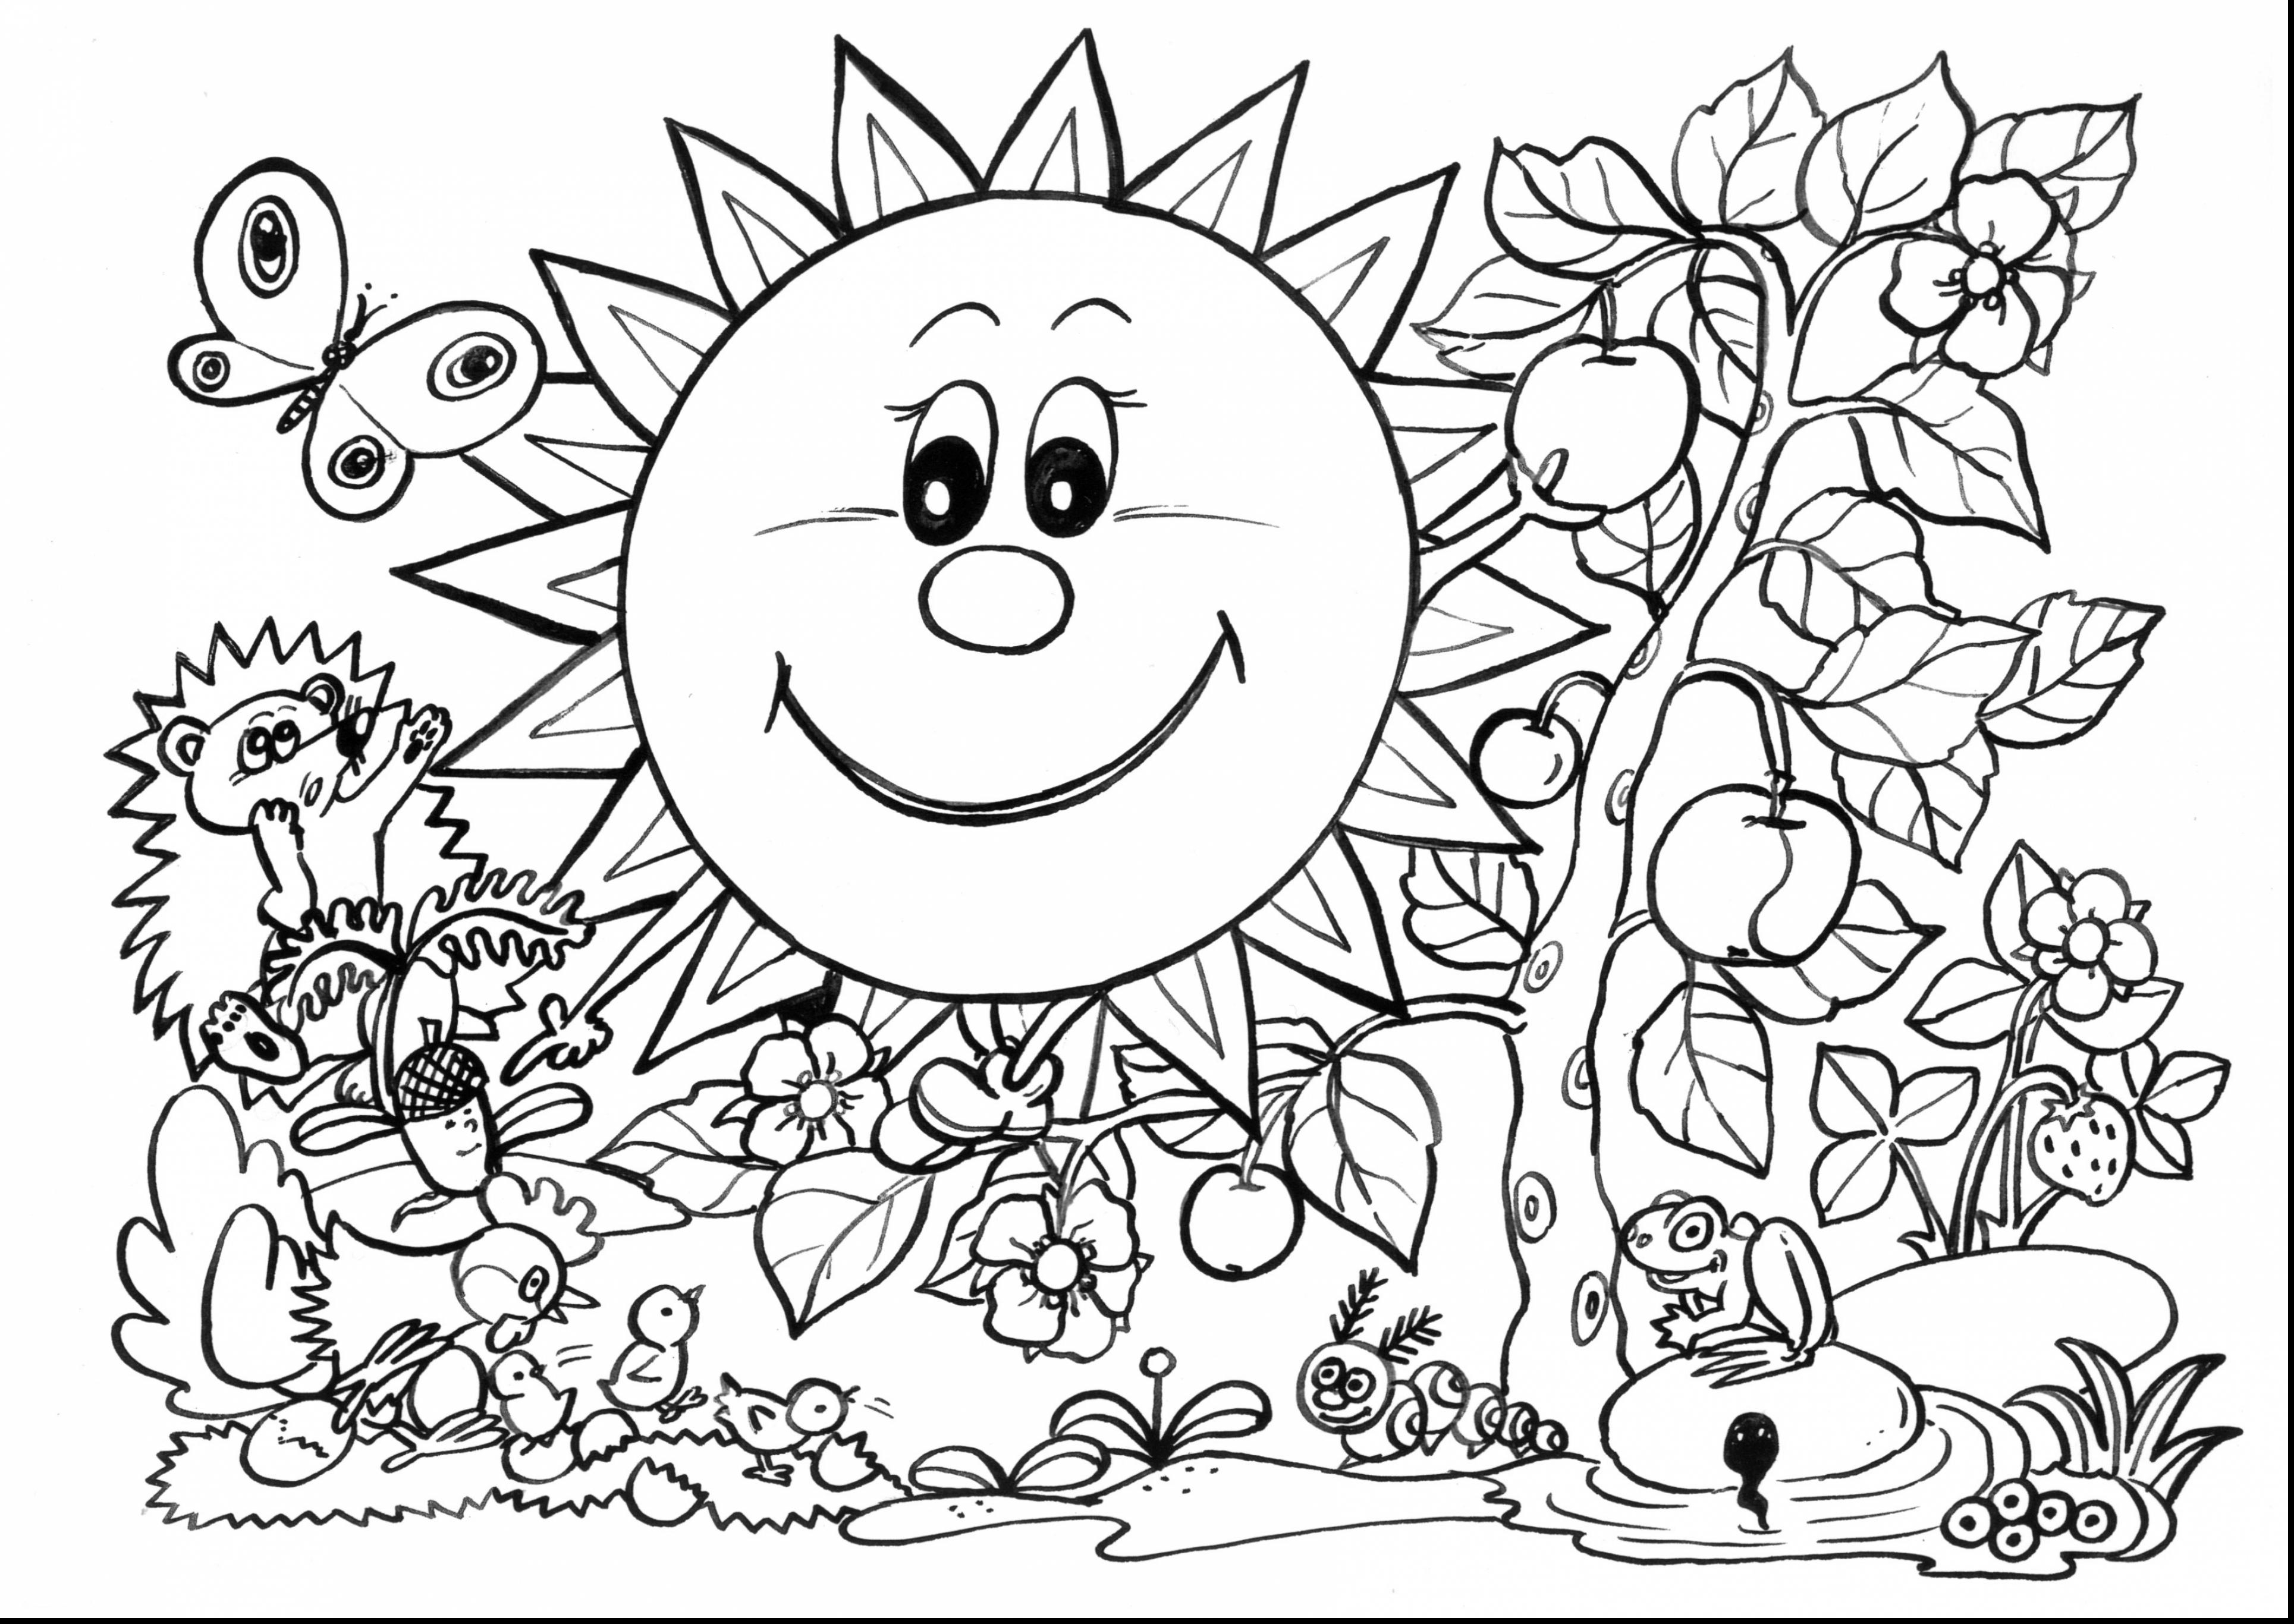 Spring Coloring Pages Spring Time Coloring Pages At Getdrawings Free For Personal